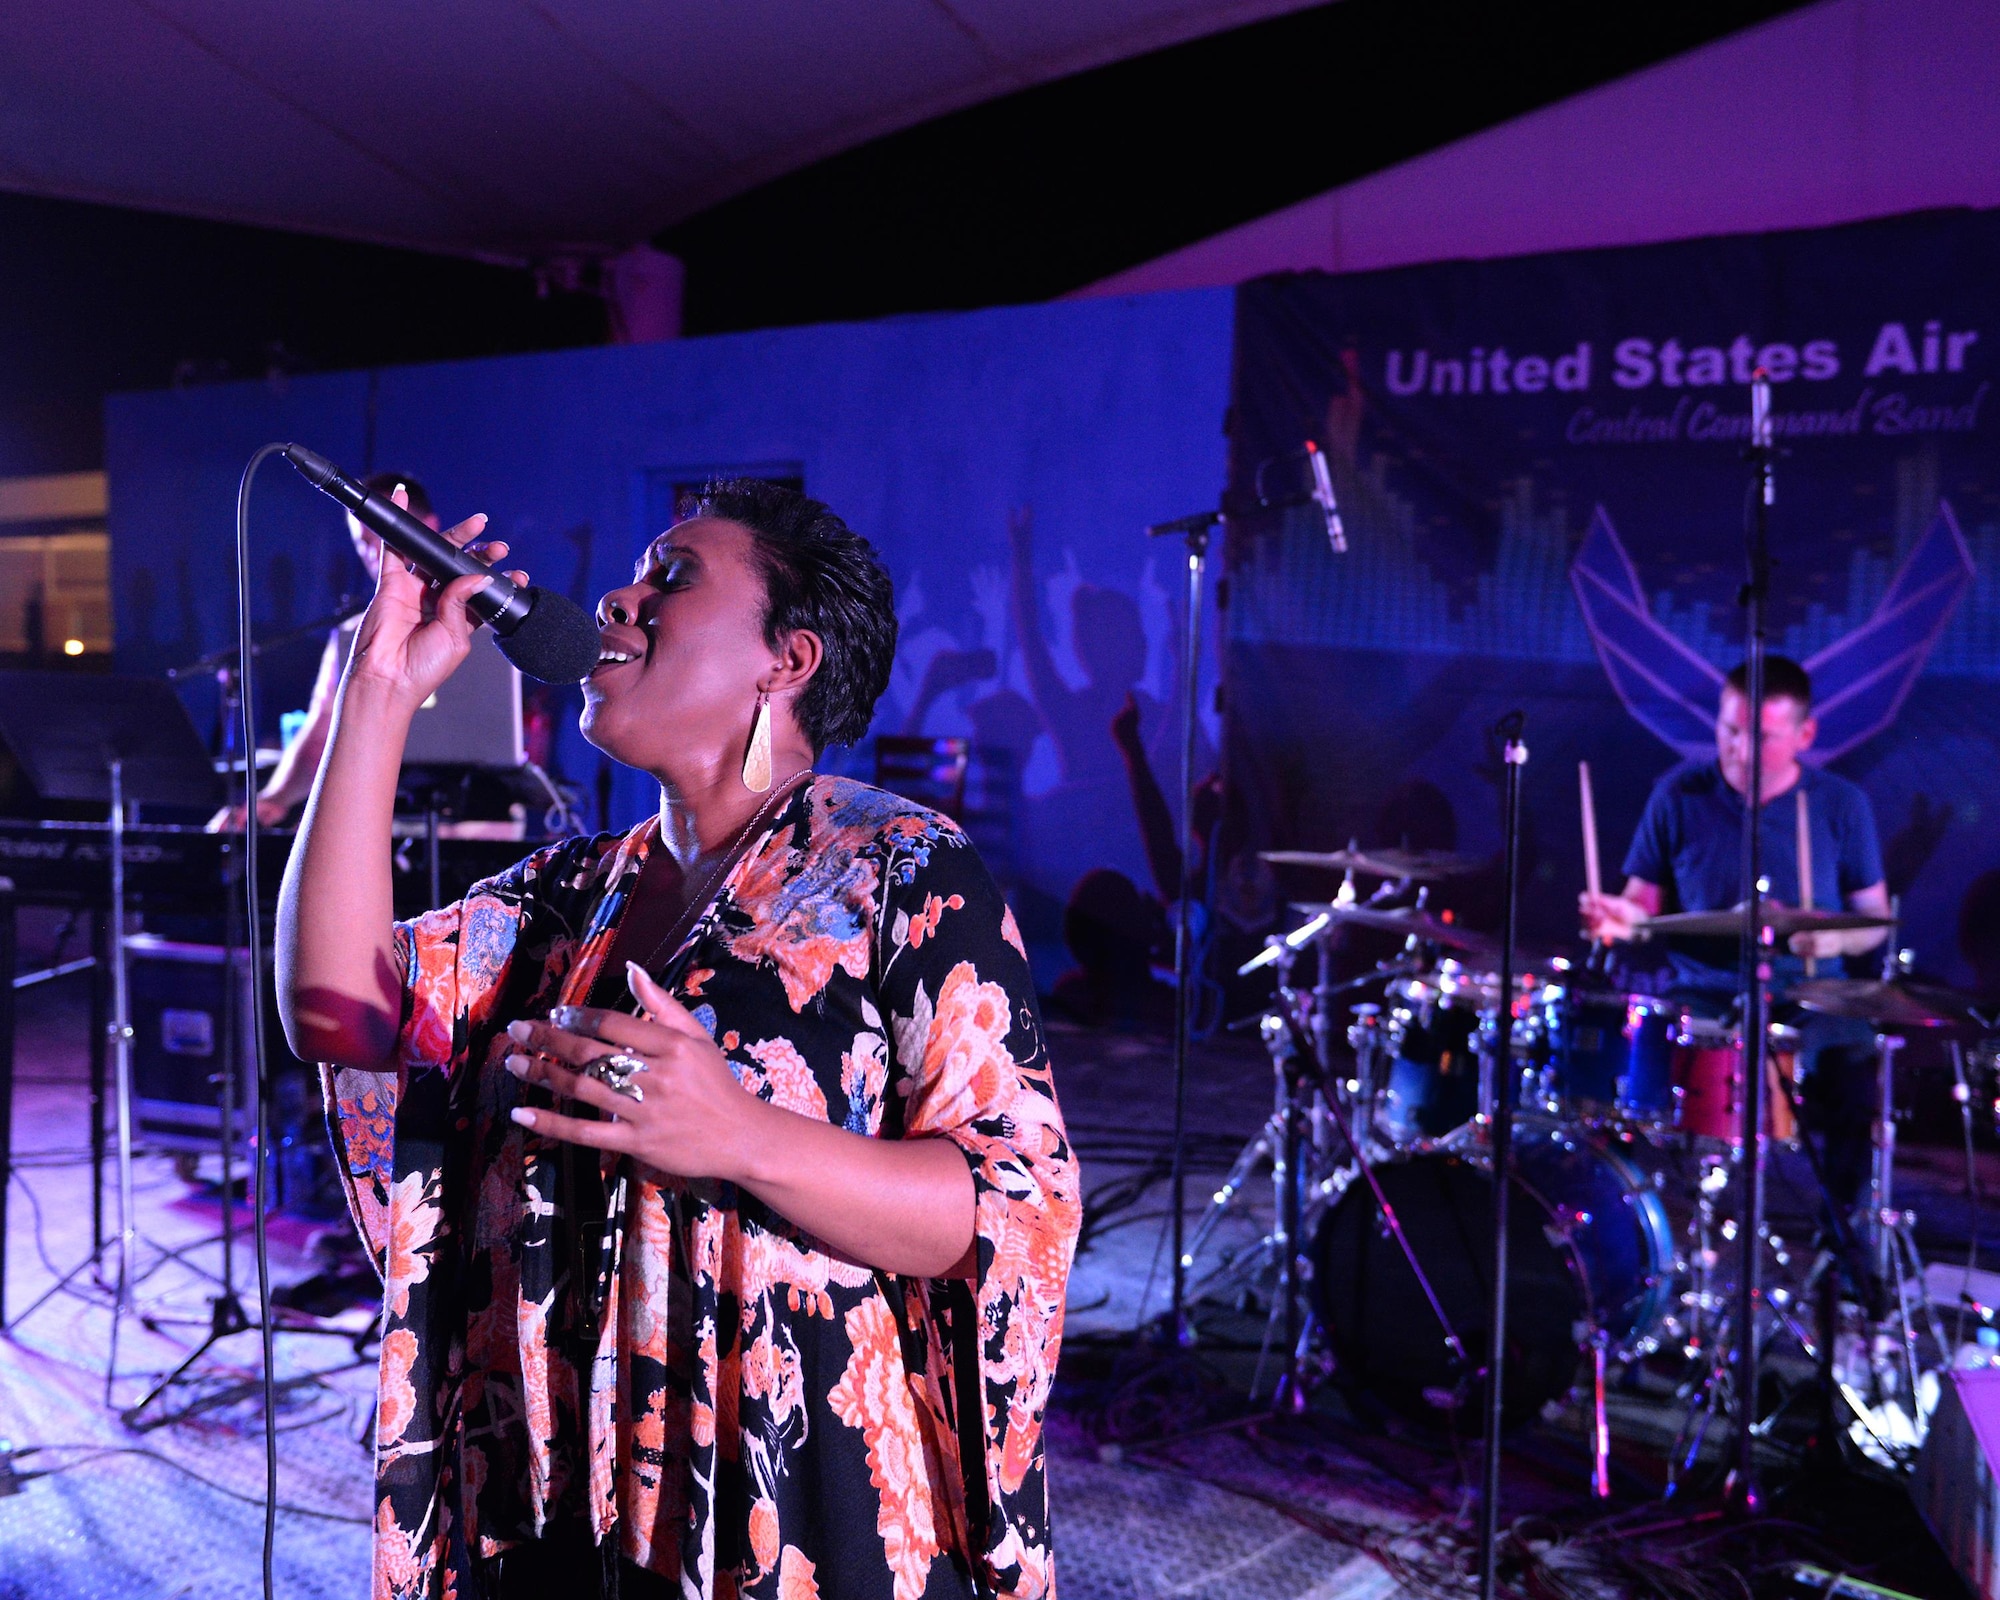 Melinda Doolittle, an accomplished vocalist and top finisher on American Idol, holds a concert with music and backup singing from members of the Air Forces Central Command Band at Al Udeid Air Base, Qatar, May 25, 2017. Doolittle performed for service members deployed overseas, accompanied by the Air Forces Central Command Band. (U.S. Air Force photo by Tech. Sgt. Bradly A. Schneider/Released)